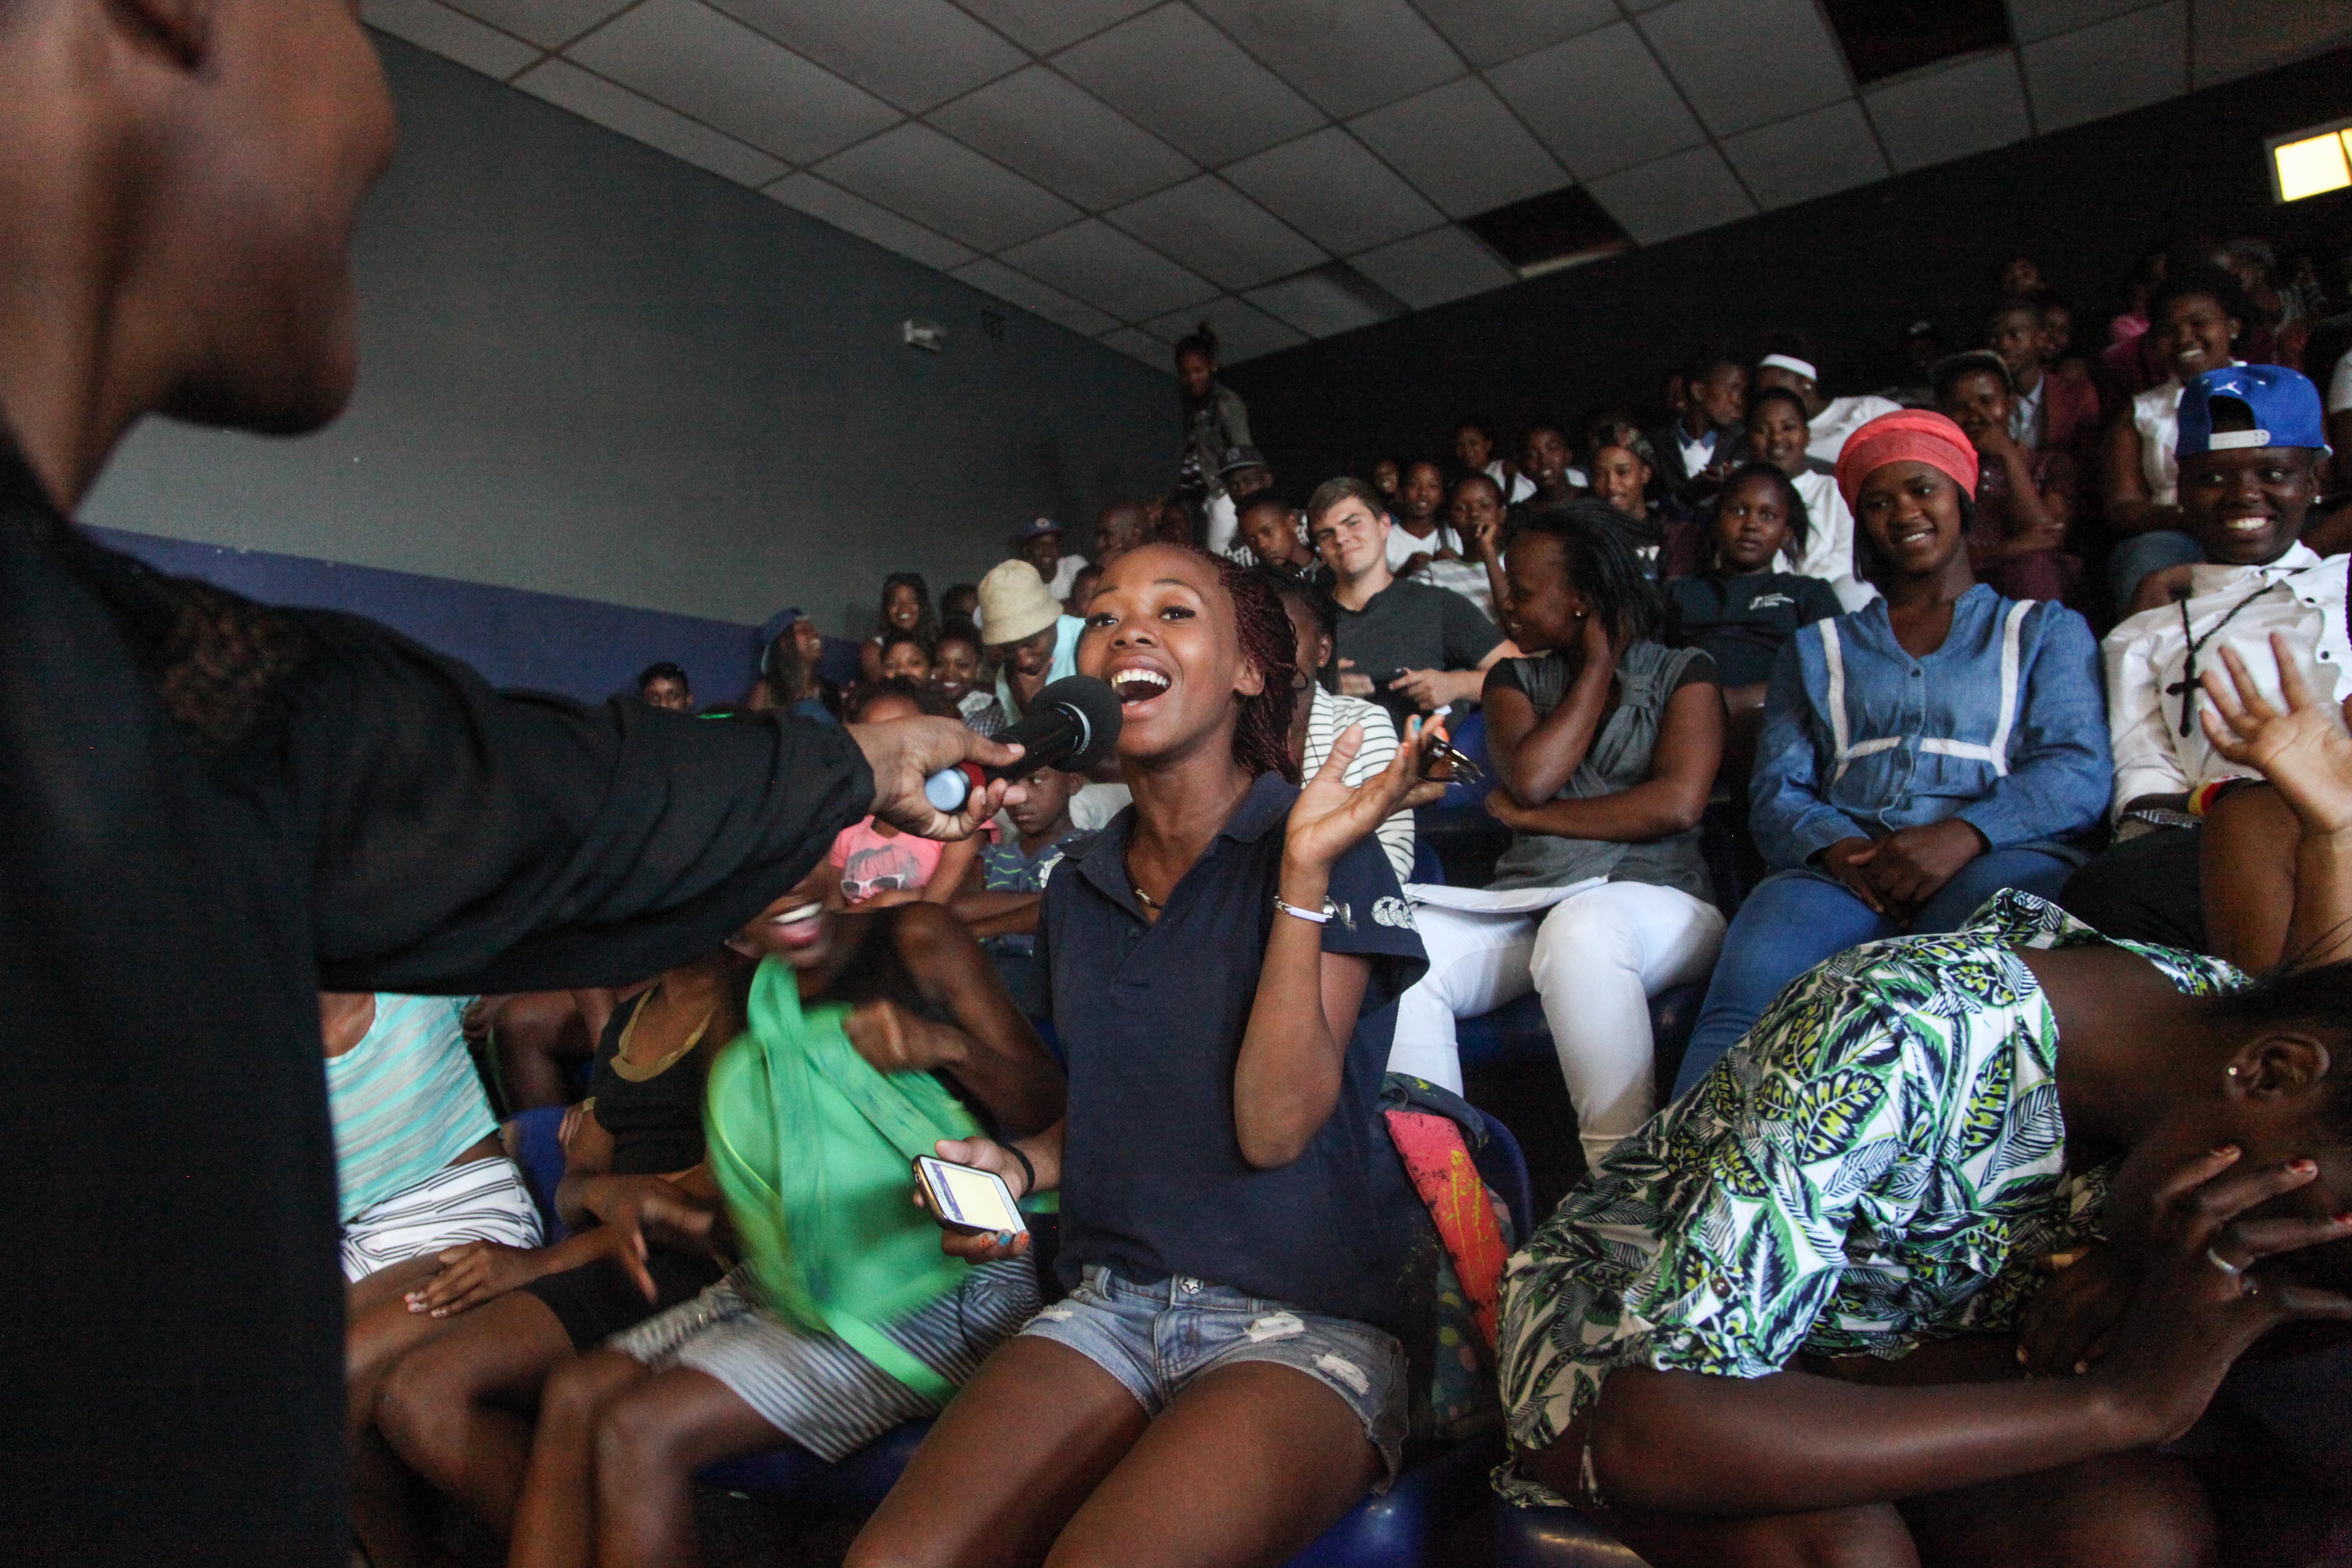 Dineo opens dialogue surrounding gender based violence with the crowd inbetween the screening of films